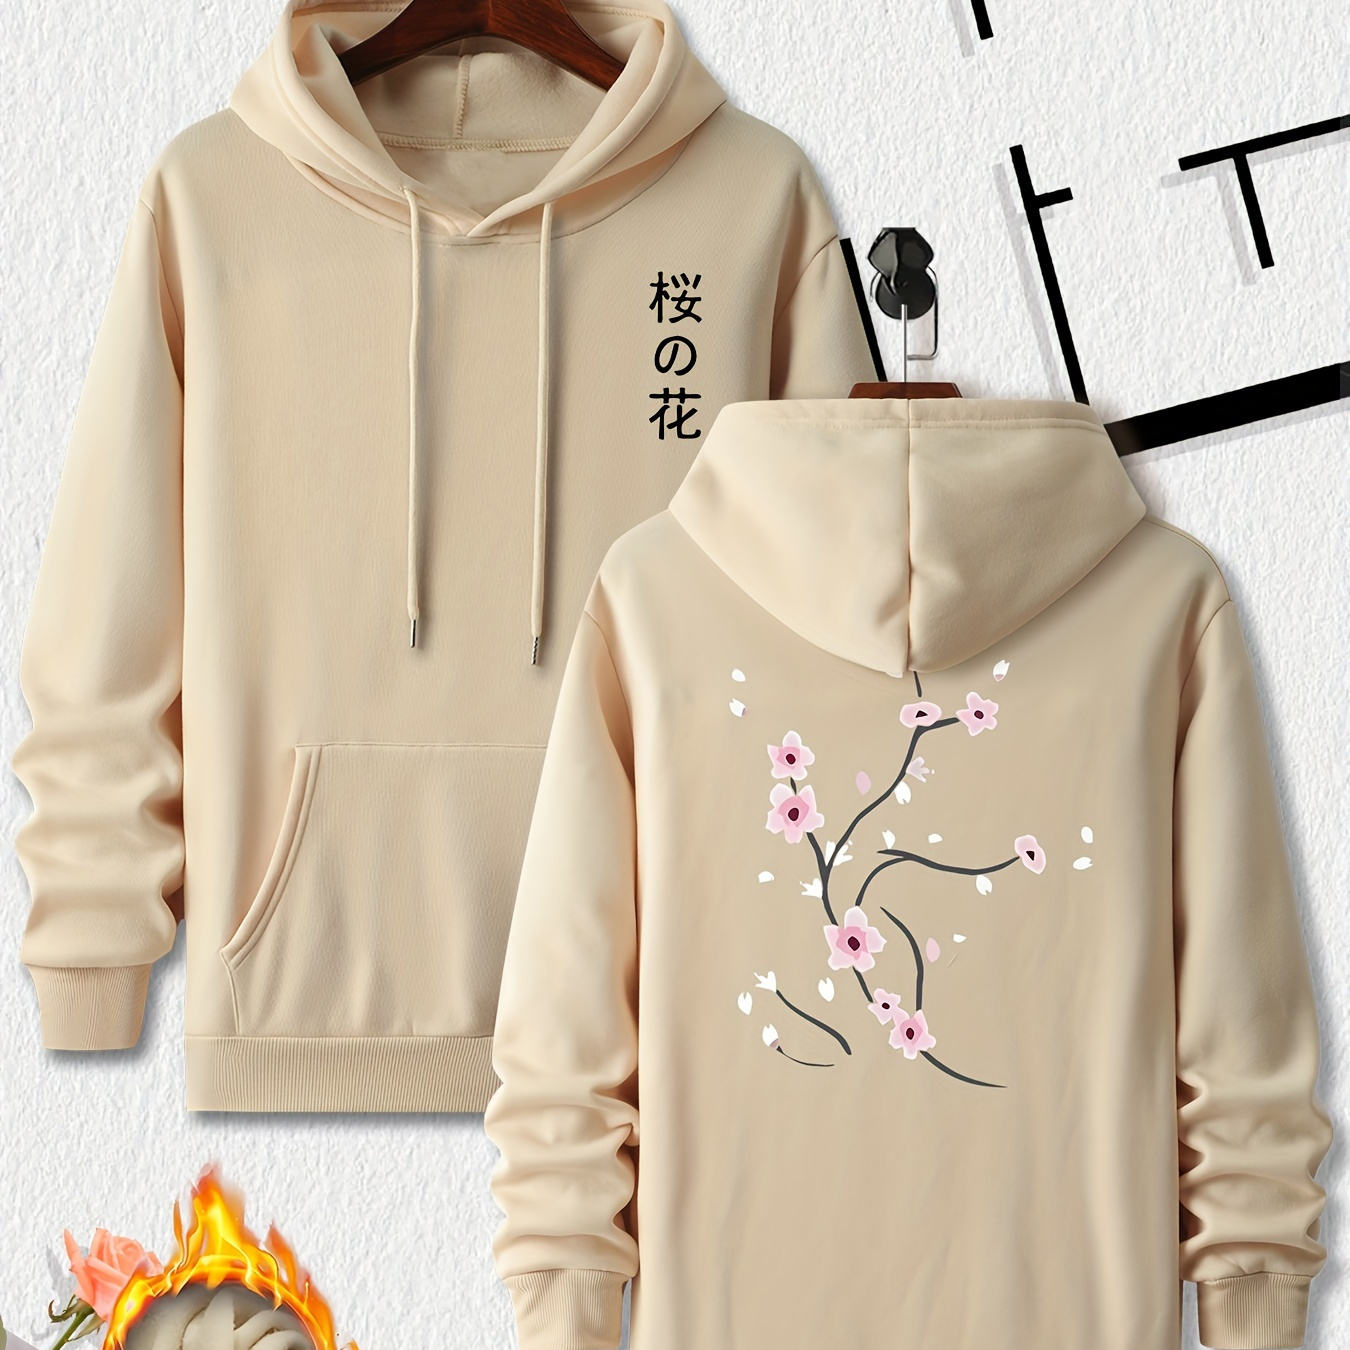 

Plum Blossom Print Hoodie, Cool Hoodies For Men, Men's Casual Pullover Hooded Sweatshirt With Kangaroo Pocket Streetwear For Winter Fall, As Gifts